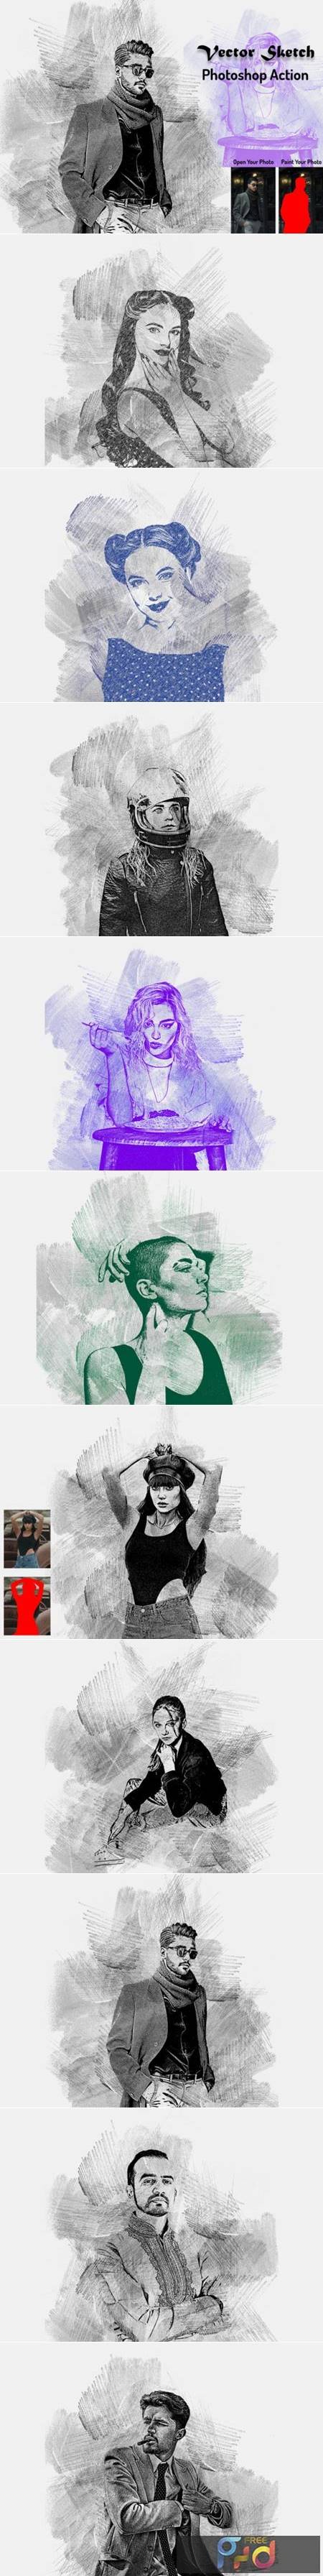 20+ Vector Art Photoshop Actions for Pretty Cool Effects - Decolore